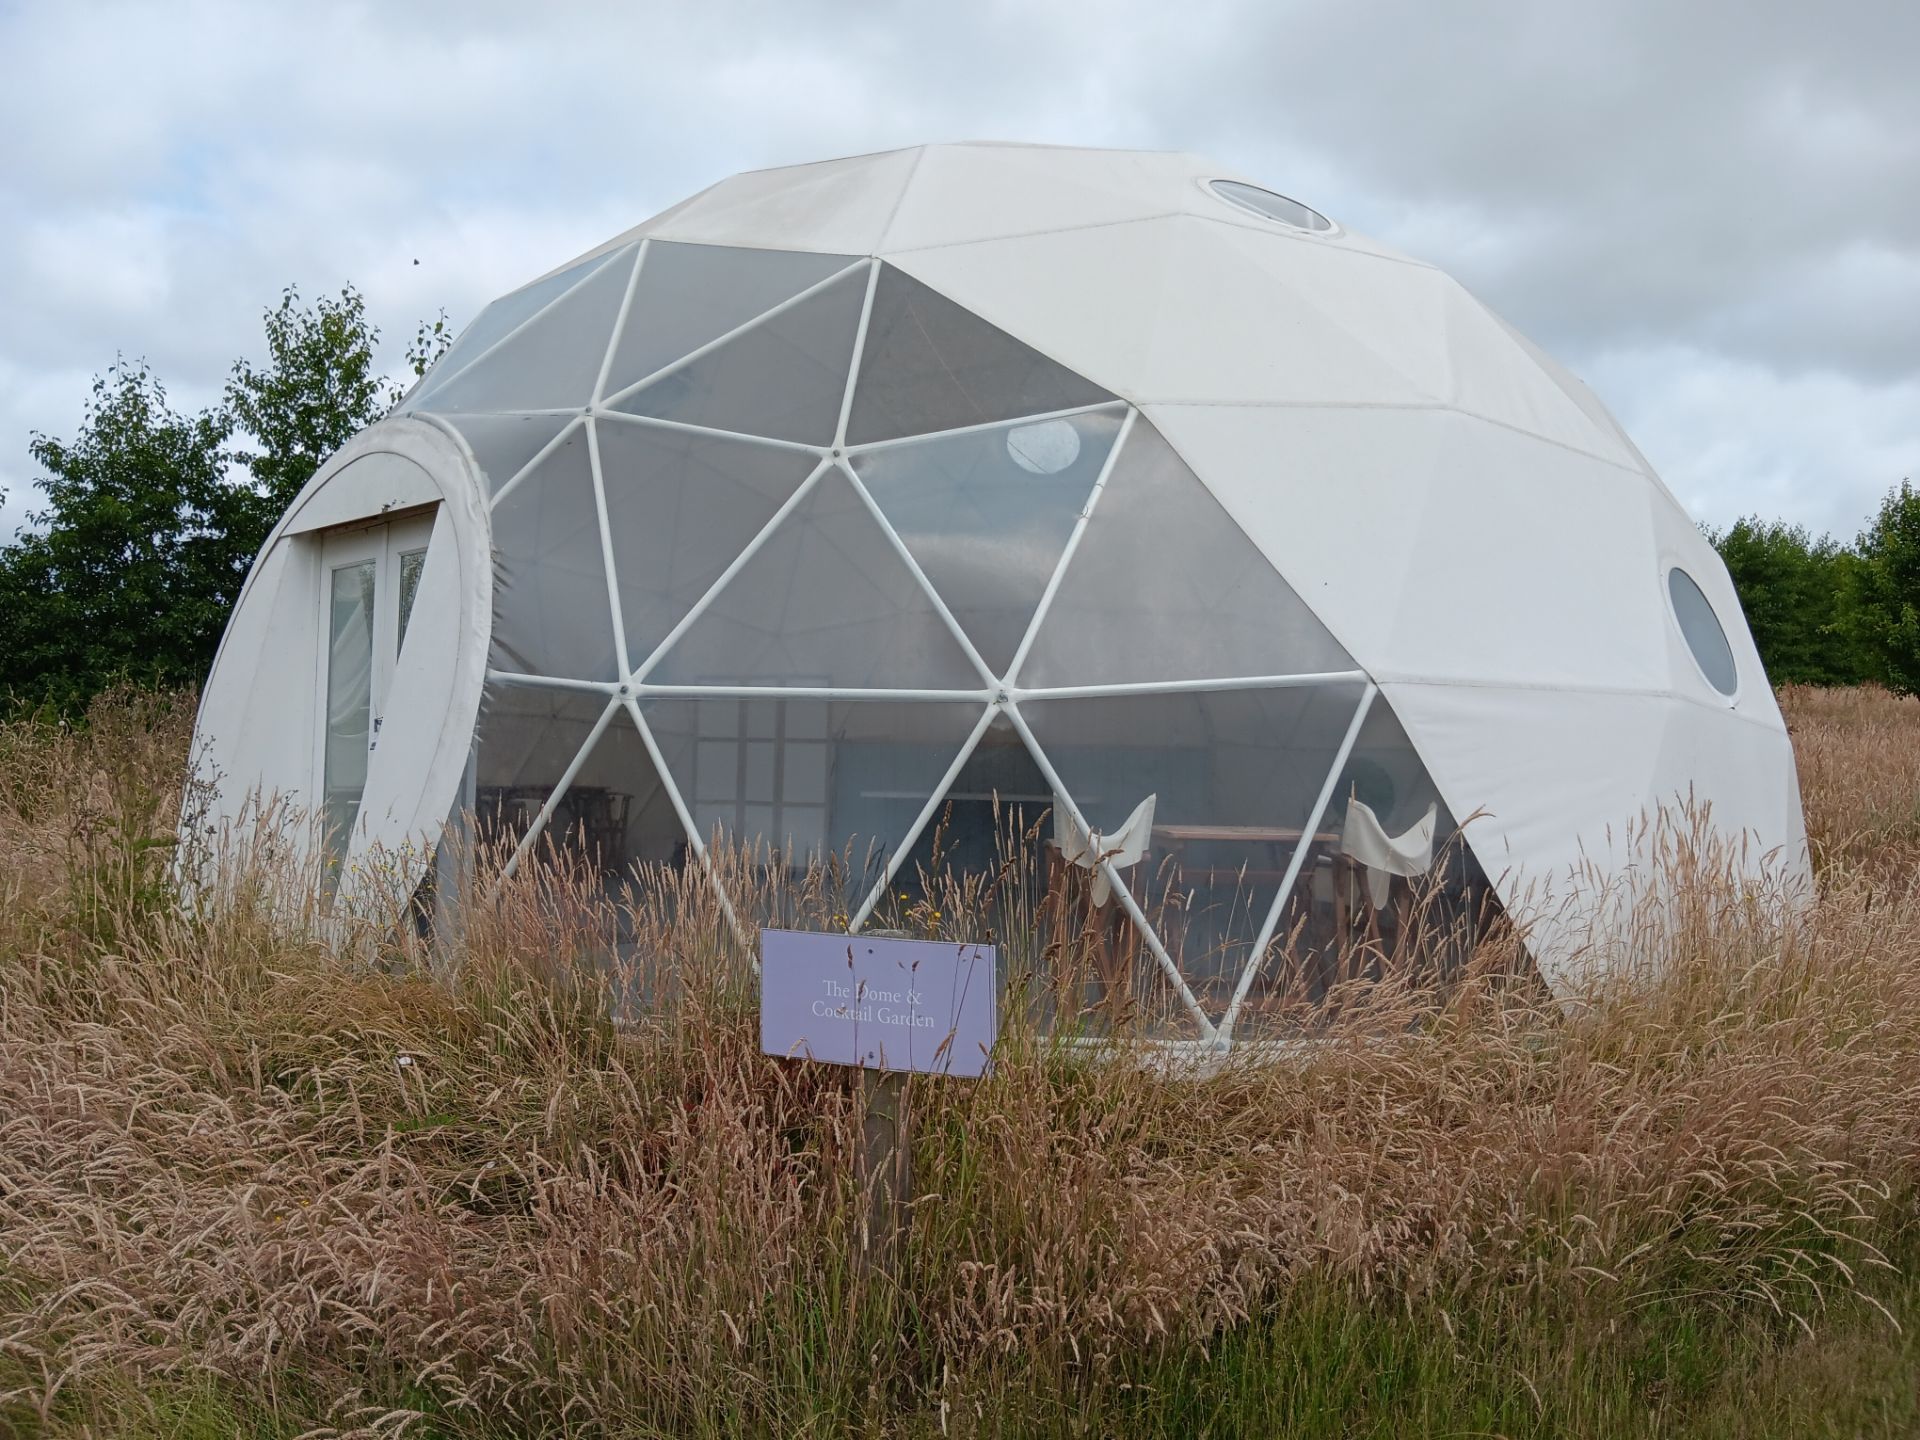 Pacific Domes 9m geodesic dome tent with furniture Viewing strongly recommended to establish - Image 4 of 6